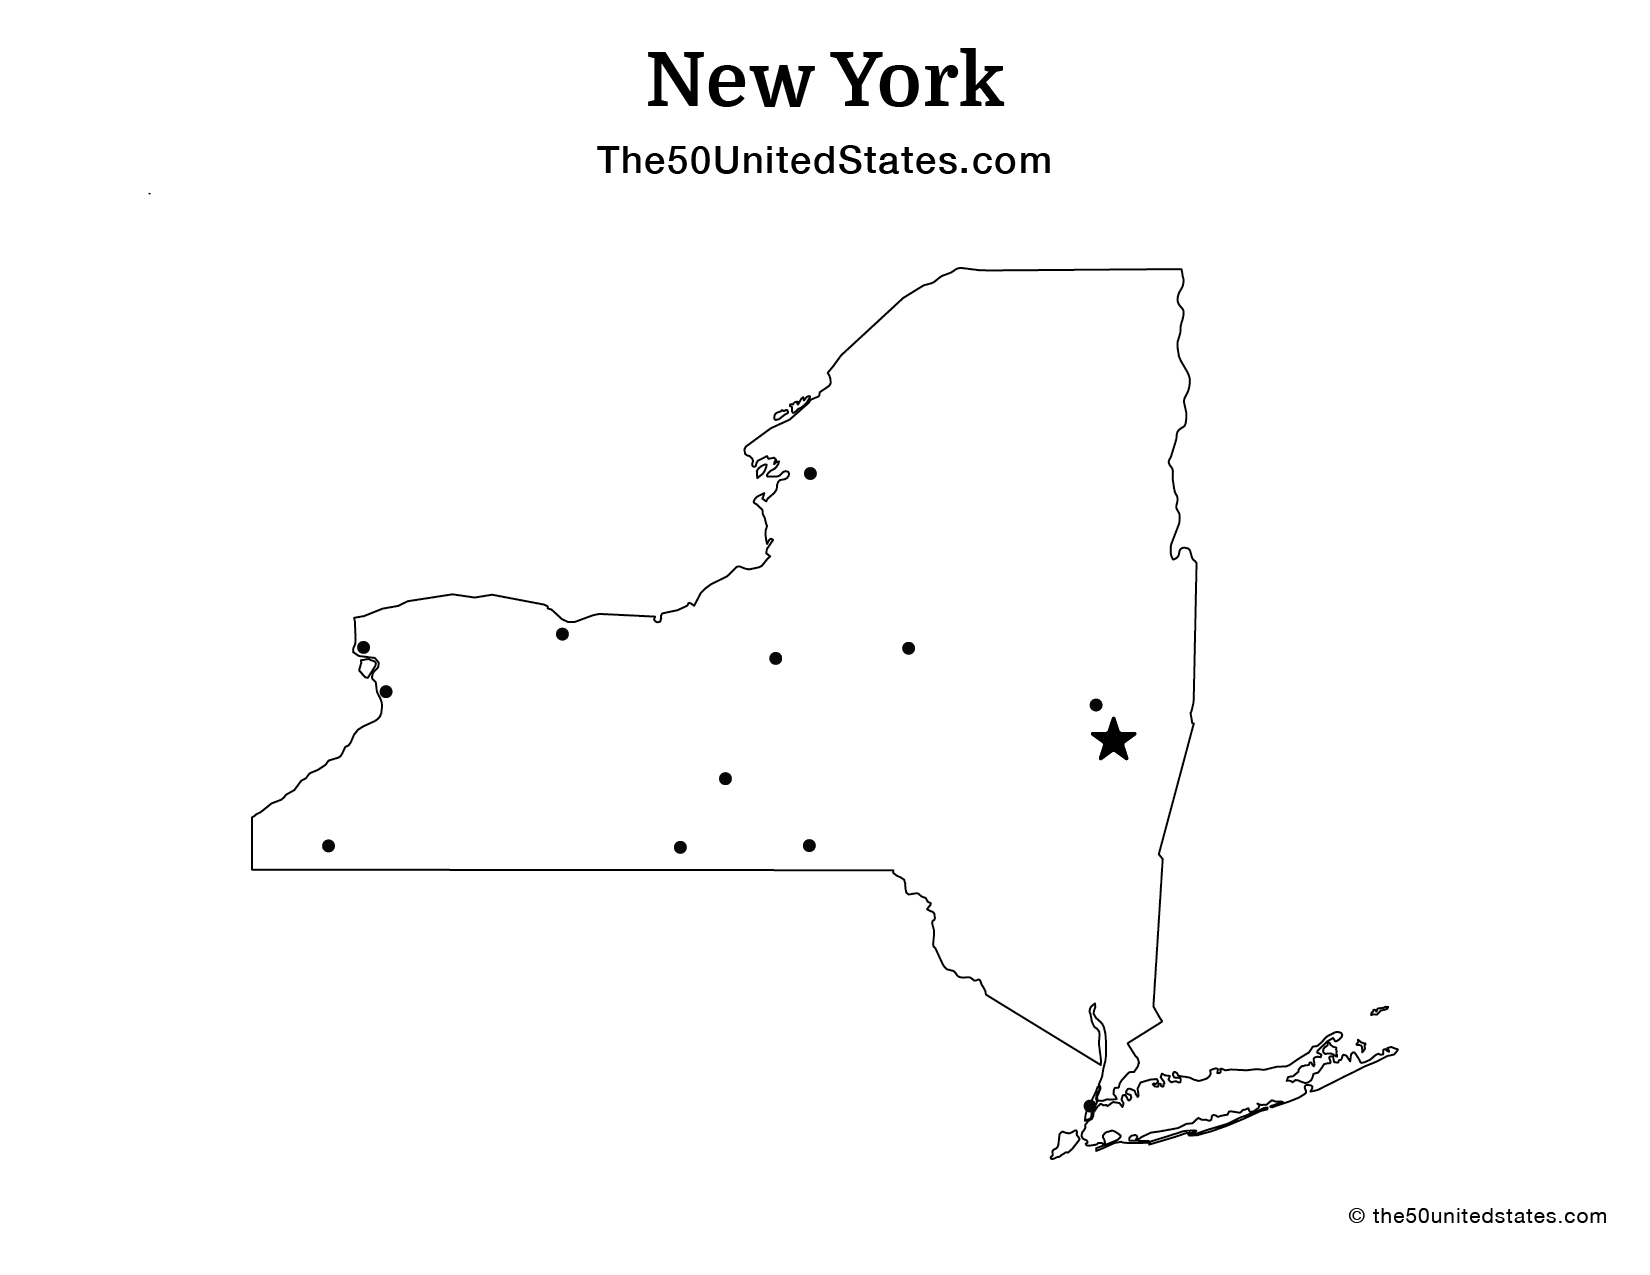 New York with Cities (Blank)